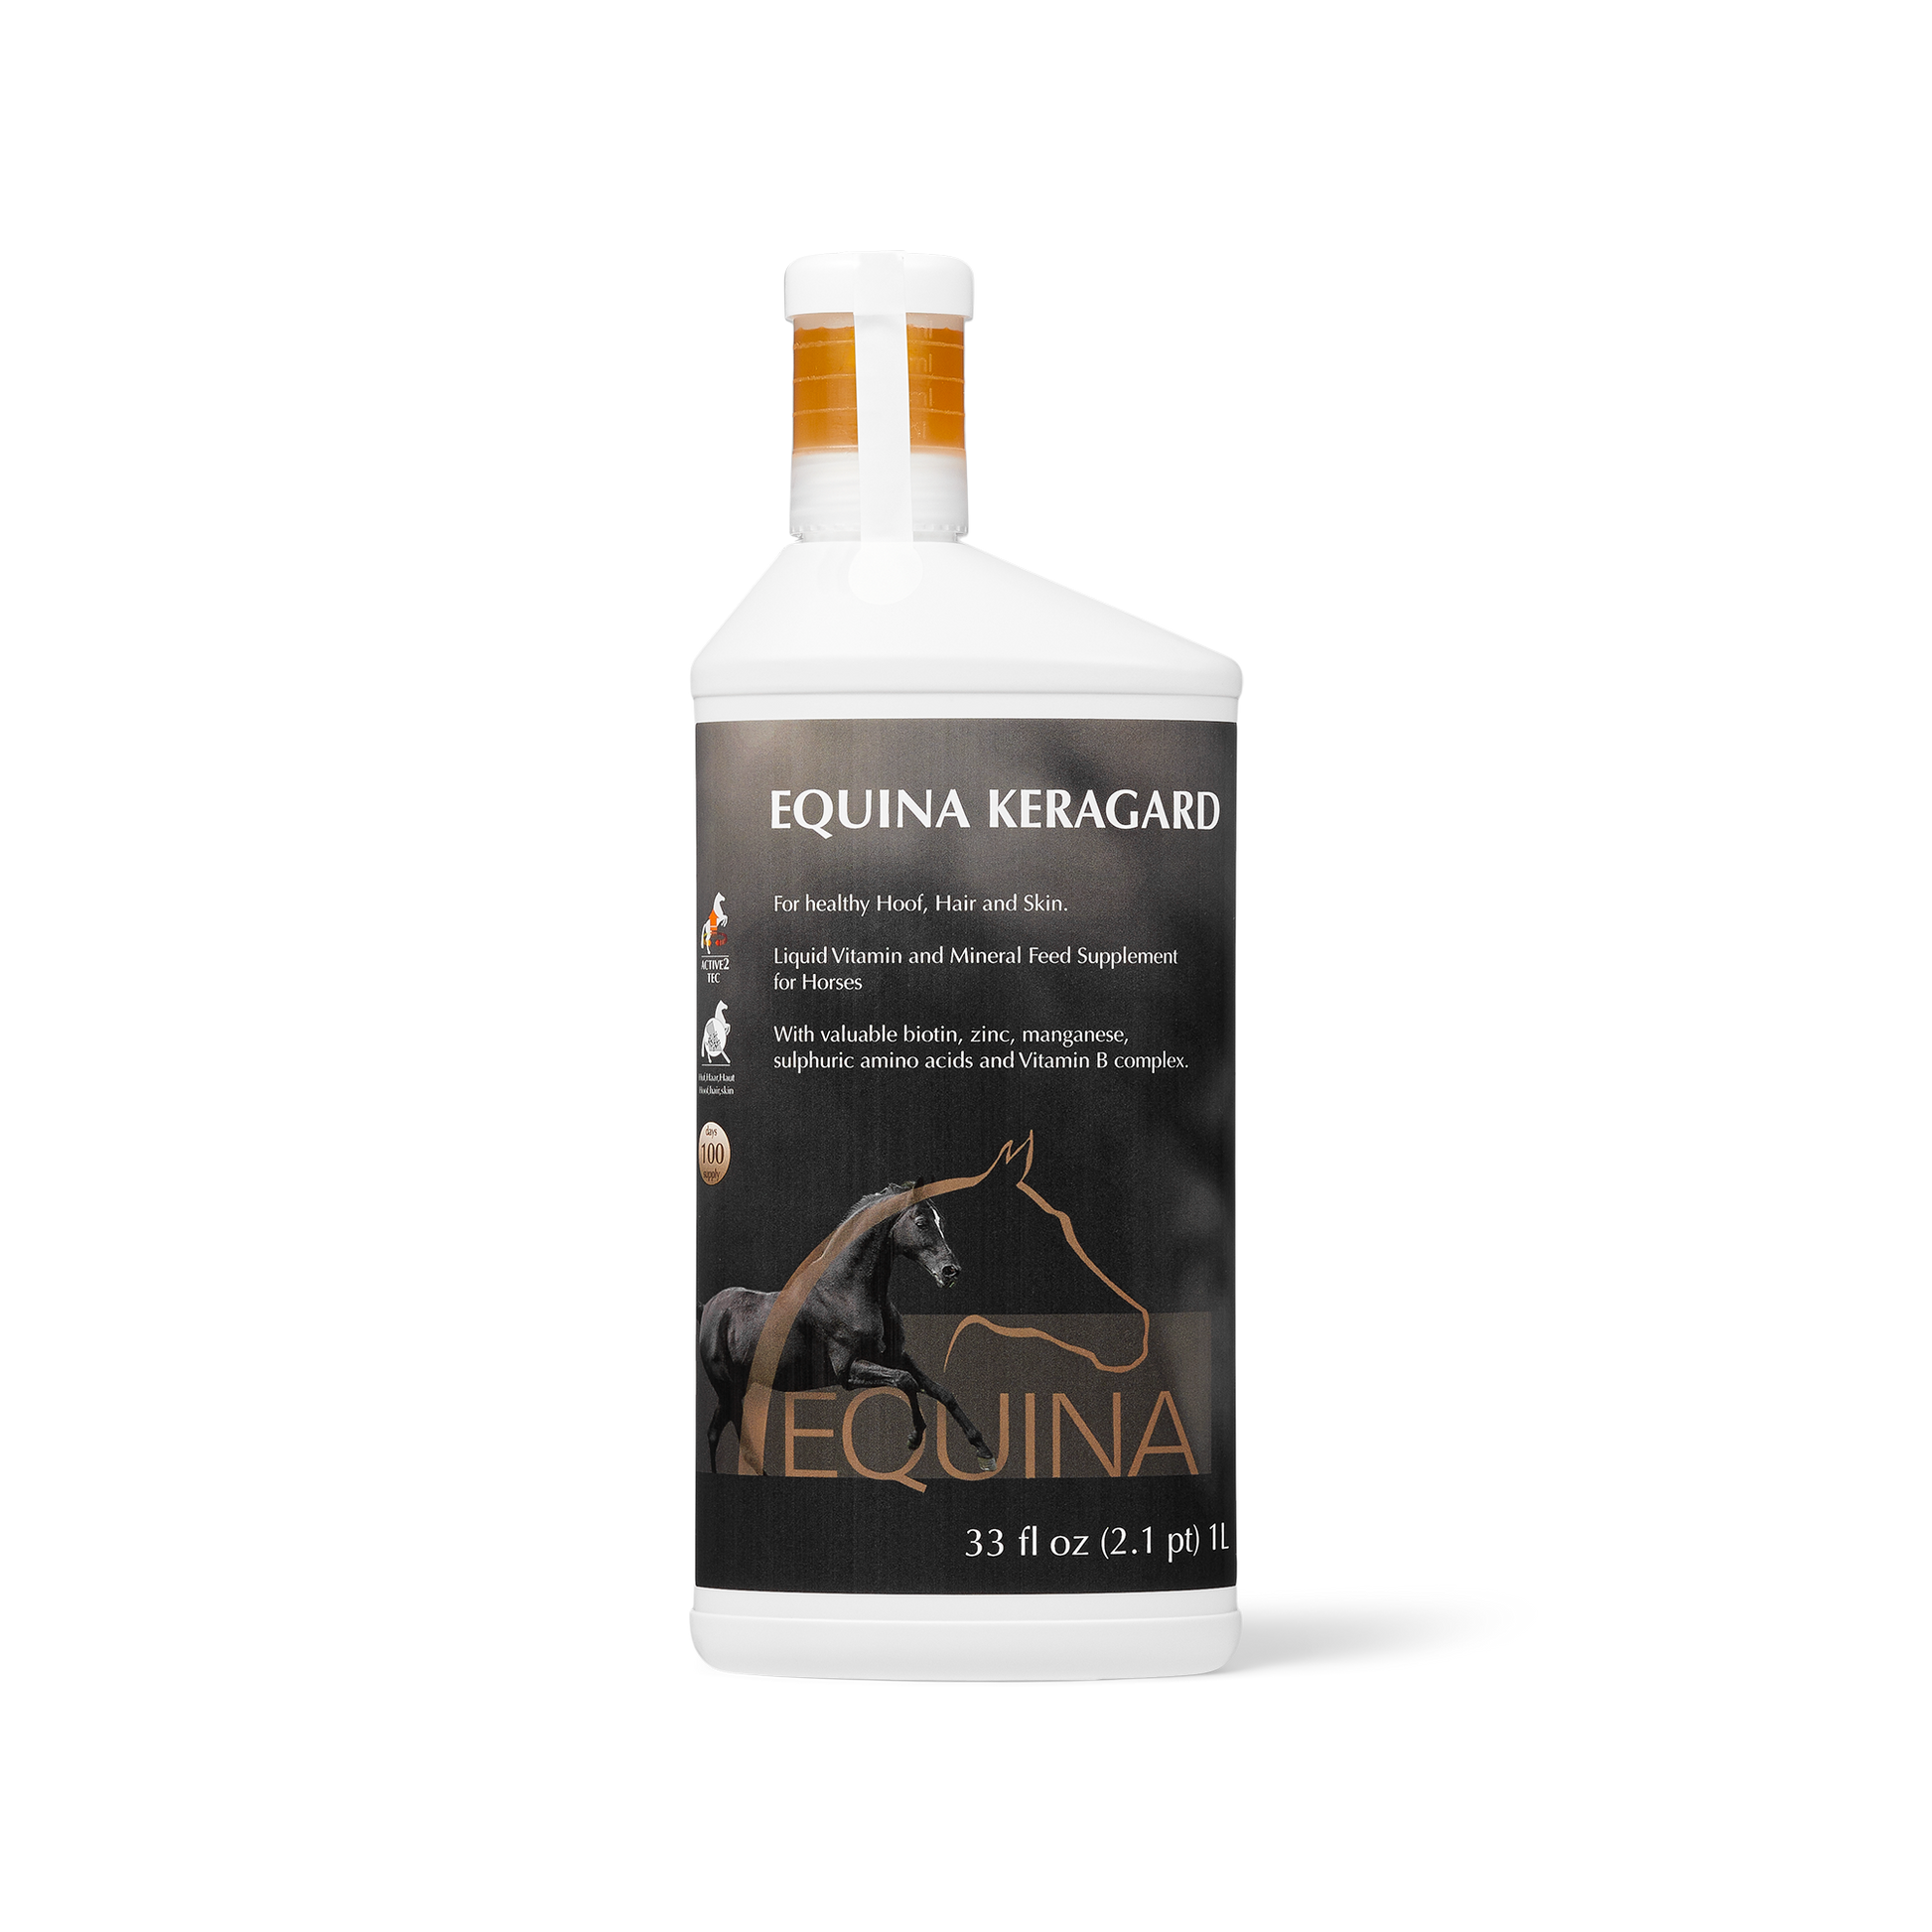 Hoof health, healthy coat and skin for horses, all natural supplement with biotin and other minerals